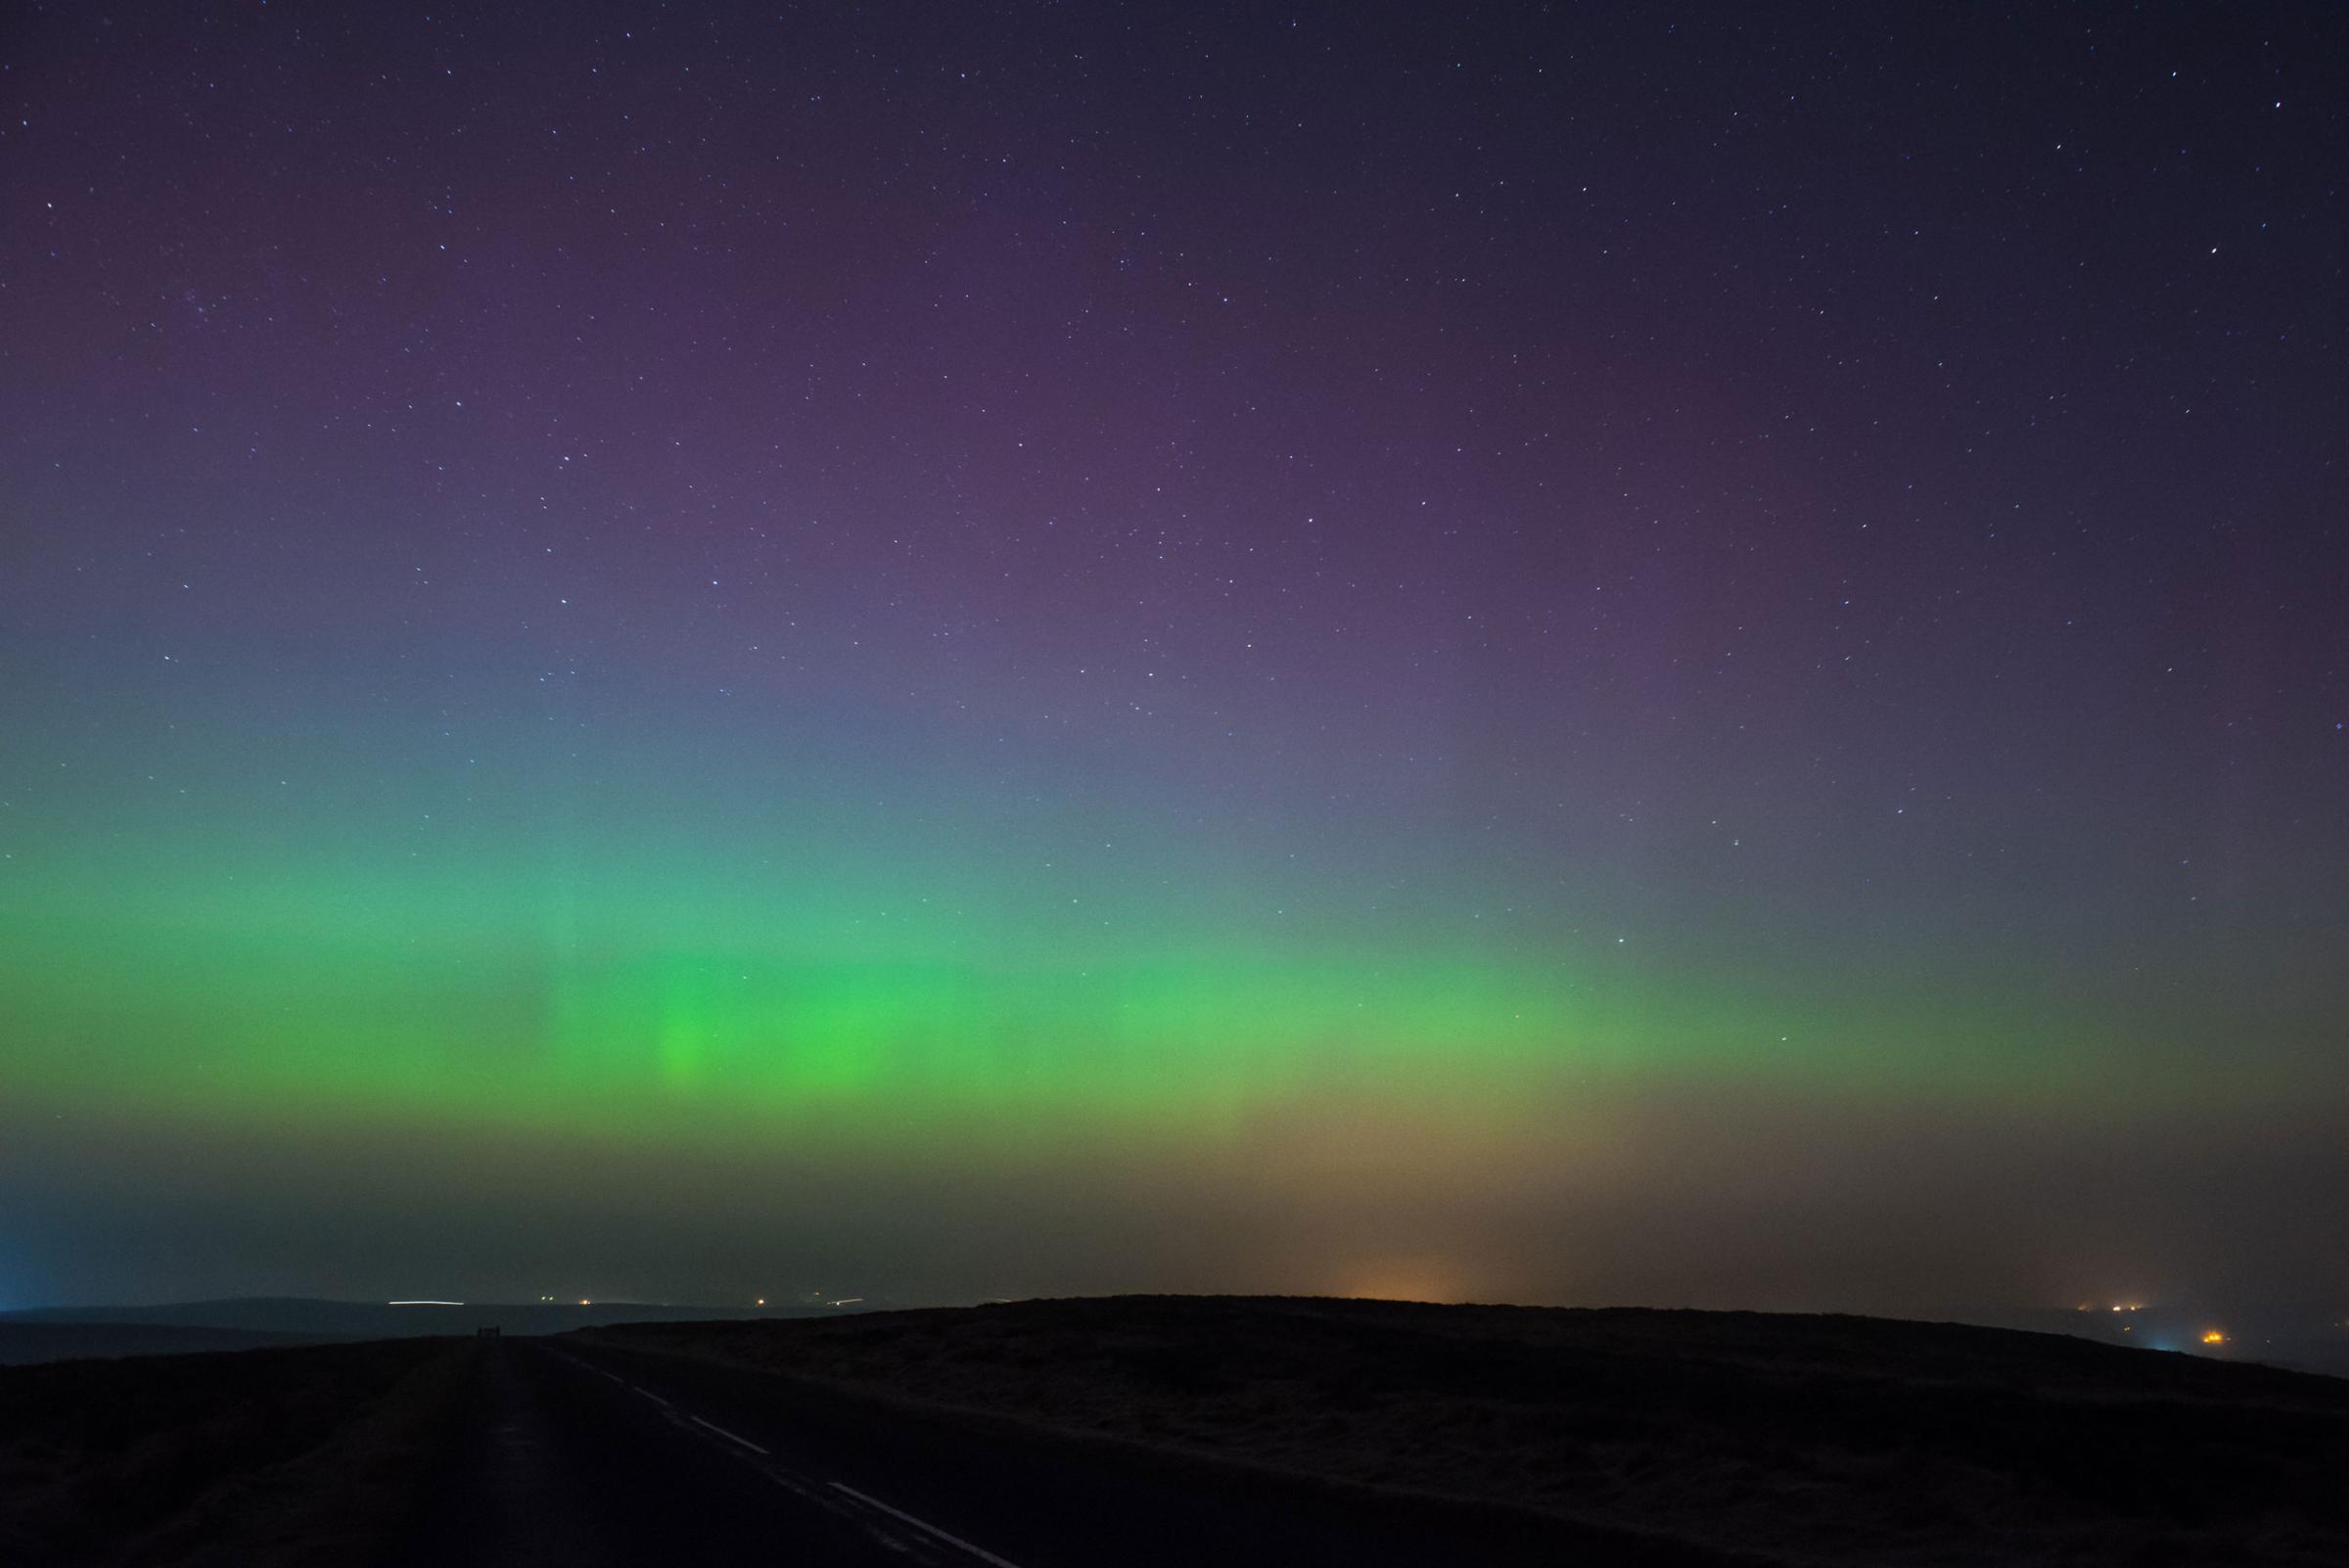 The Northern Lights above the Staffordshire moorlands in England on March 17, 2015.